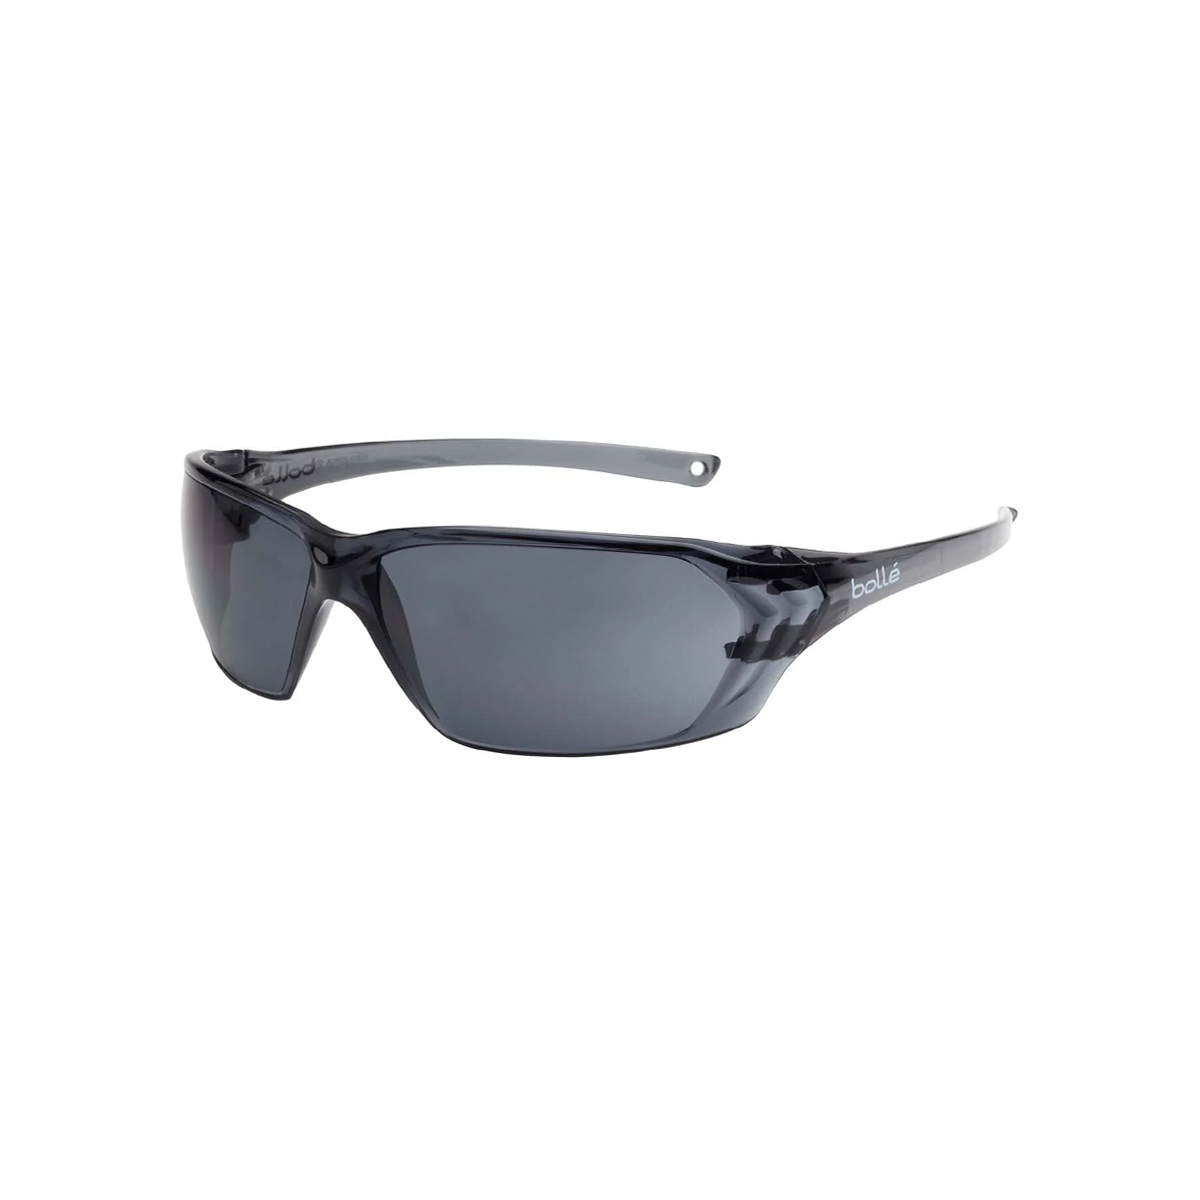 Bolle Prism Smoke Safety Glasses 1614402